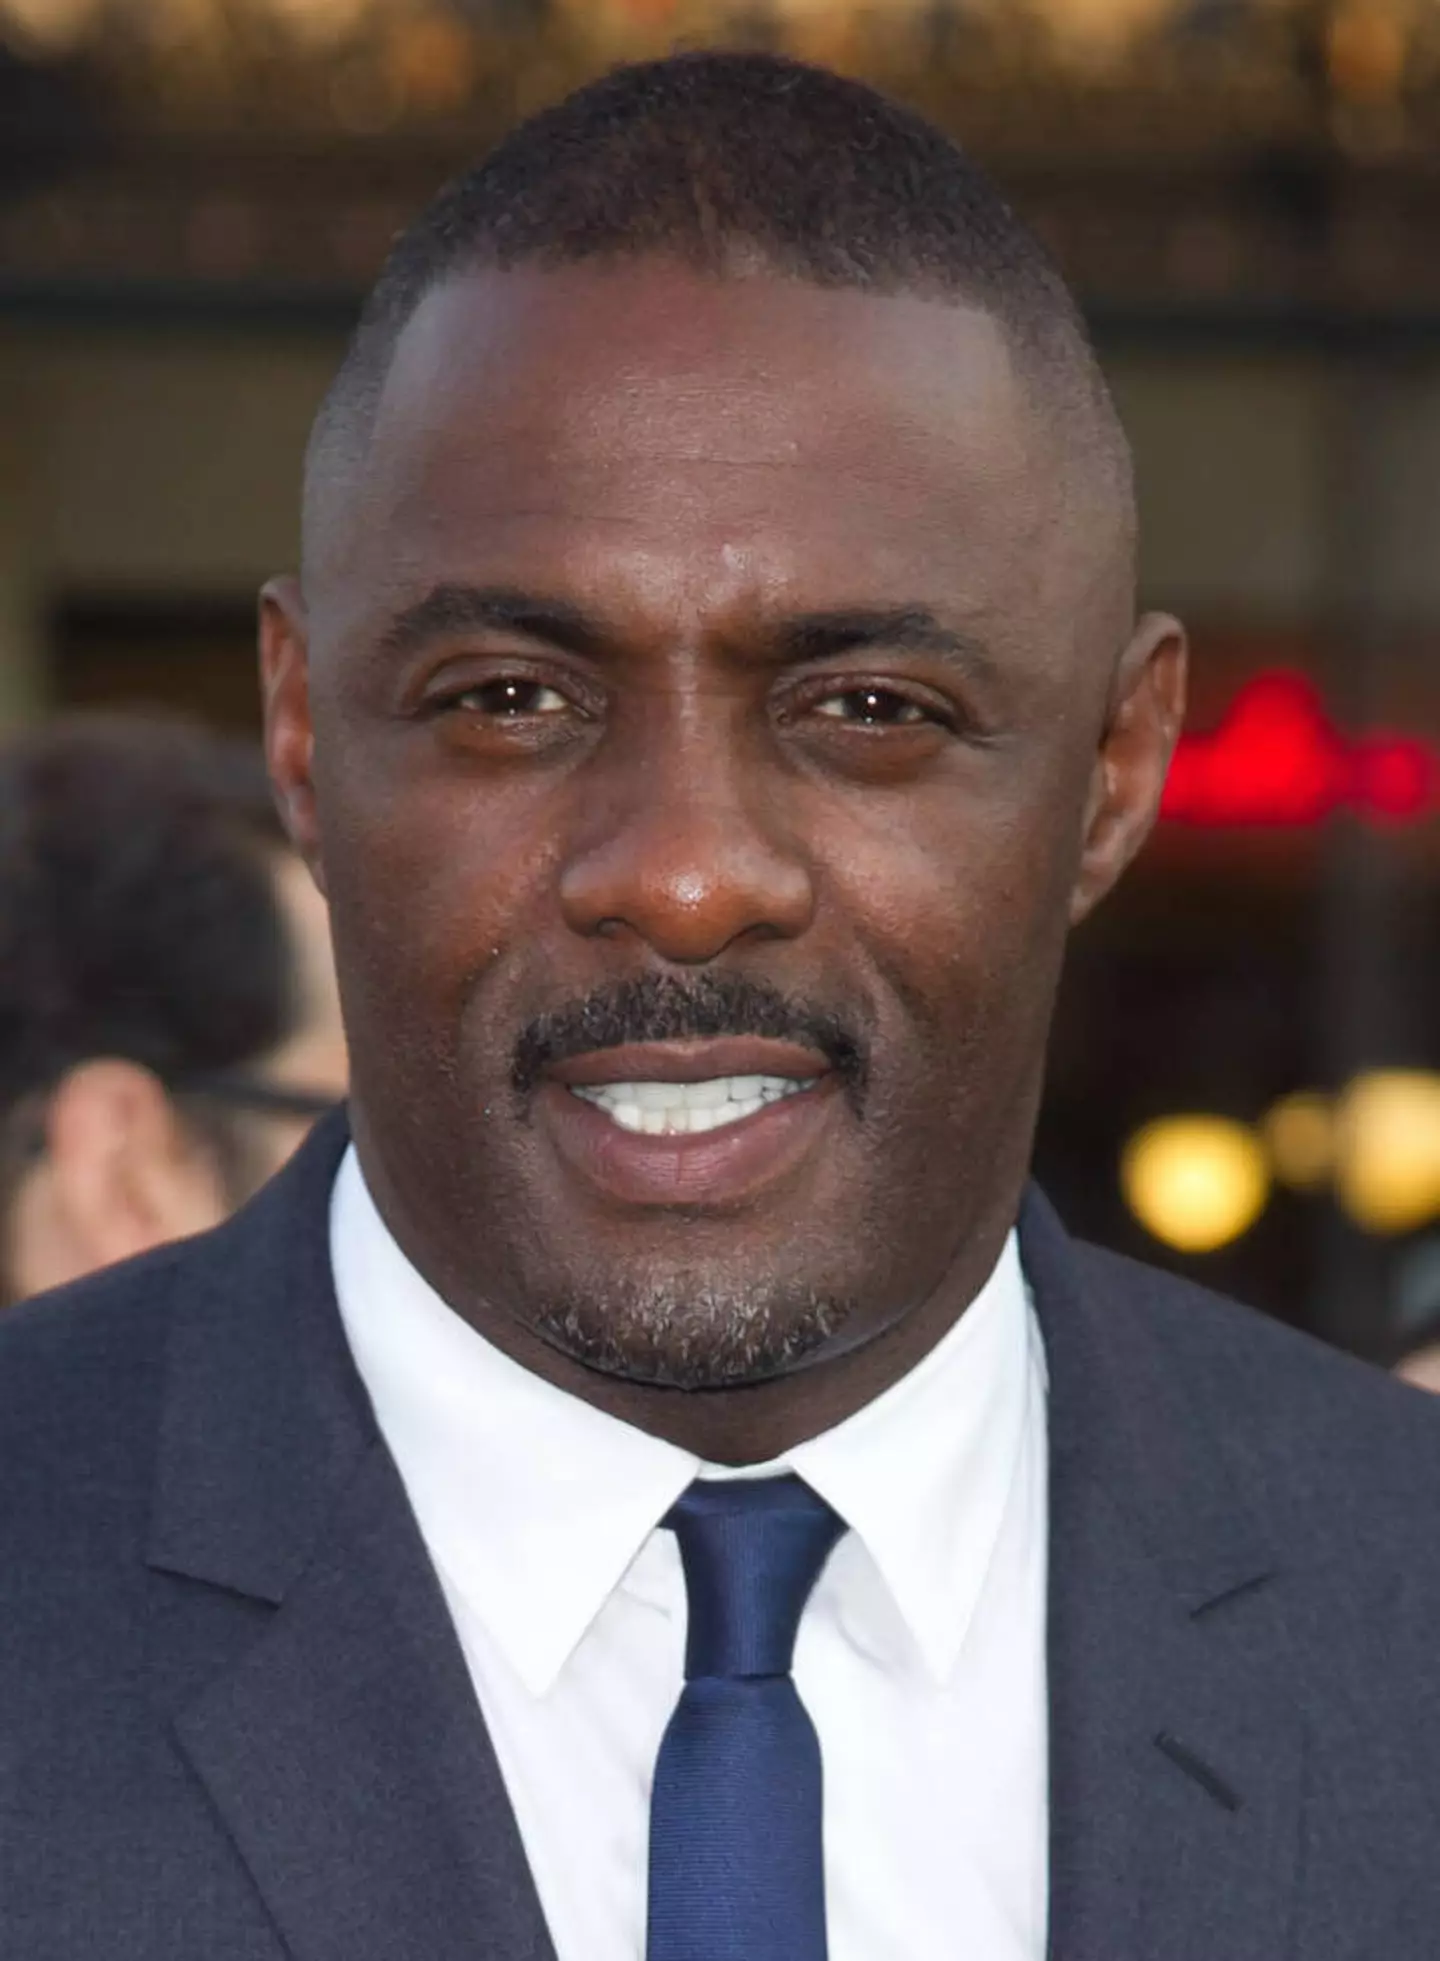 Idris Elba recently confirmed he would not be quitting acting any time soon.